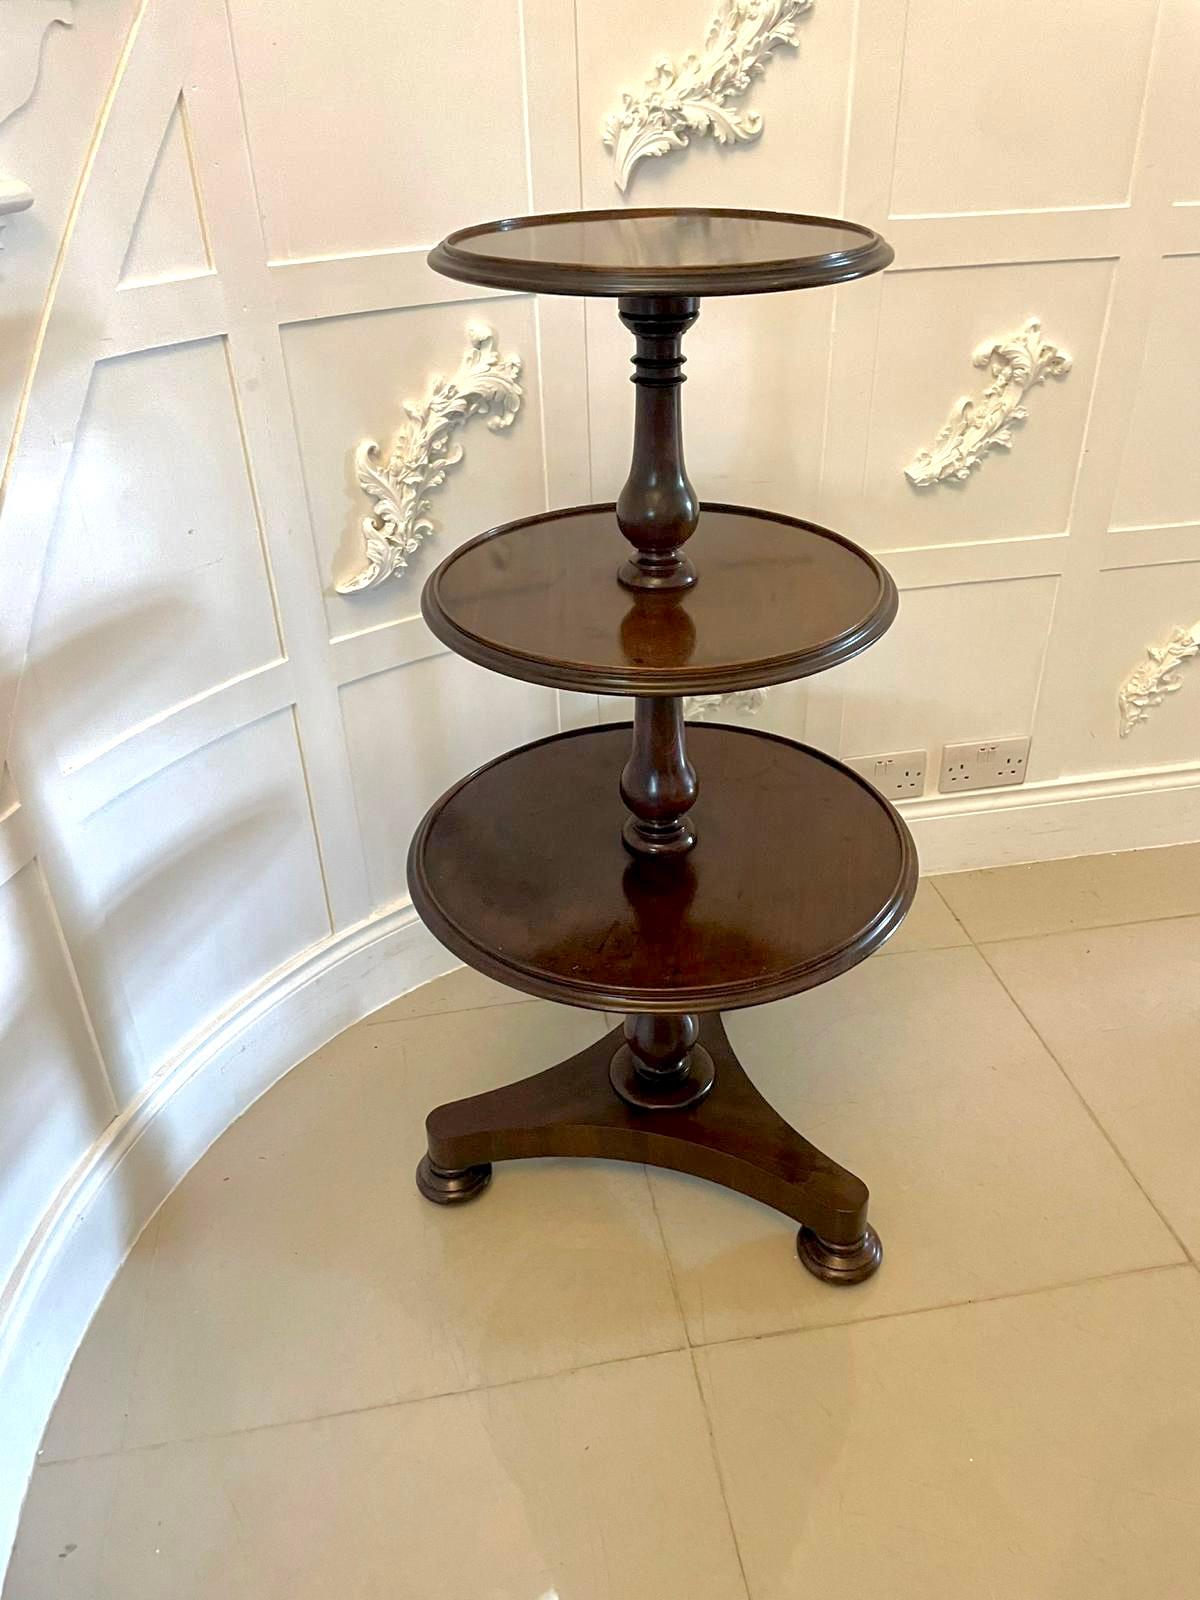 Antique George III quality mahogany circular dumbwaiter having three circular shelves with a moulded edge supported by turned shaped columns standing on a platform base with original turned feet and castors


A classic quality example of the period